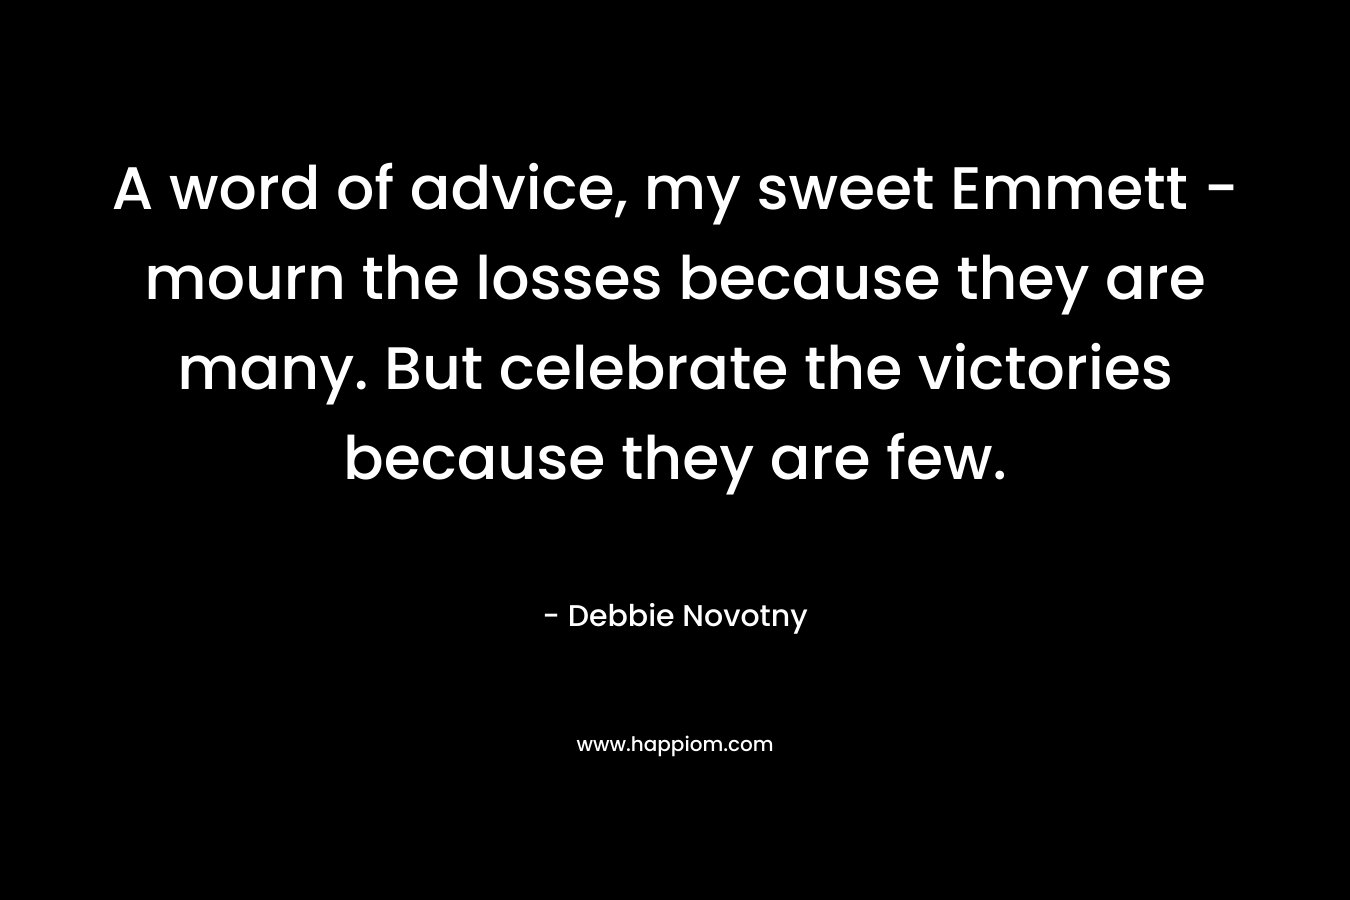 A word of advice, my sweet Emmett – mourn the losses because they are many. But celebrate the victories because they are few. – Debbie Novotny